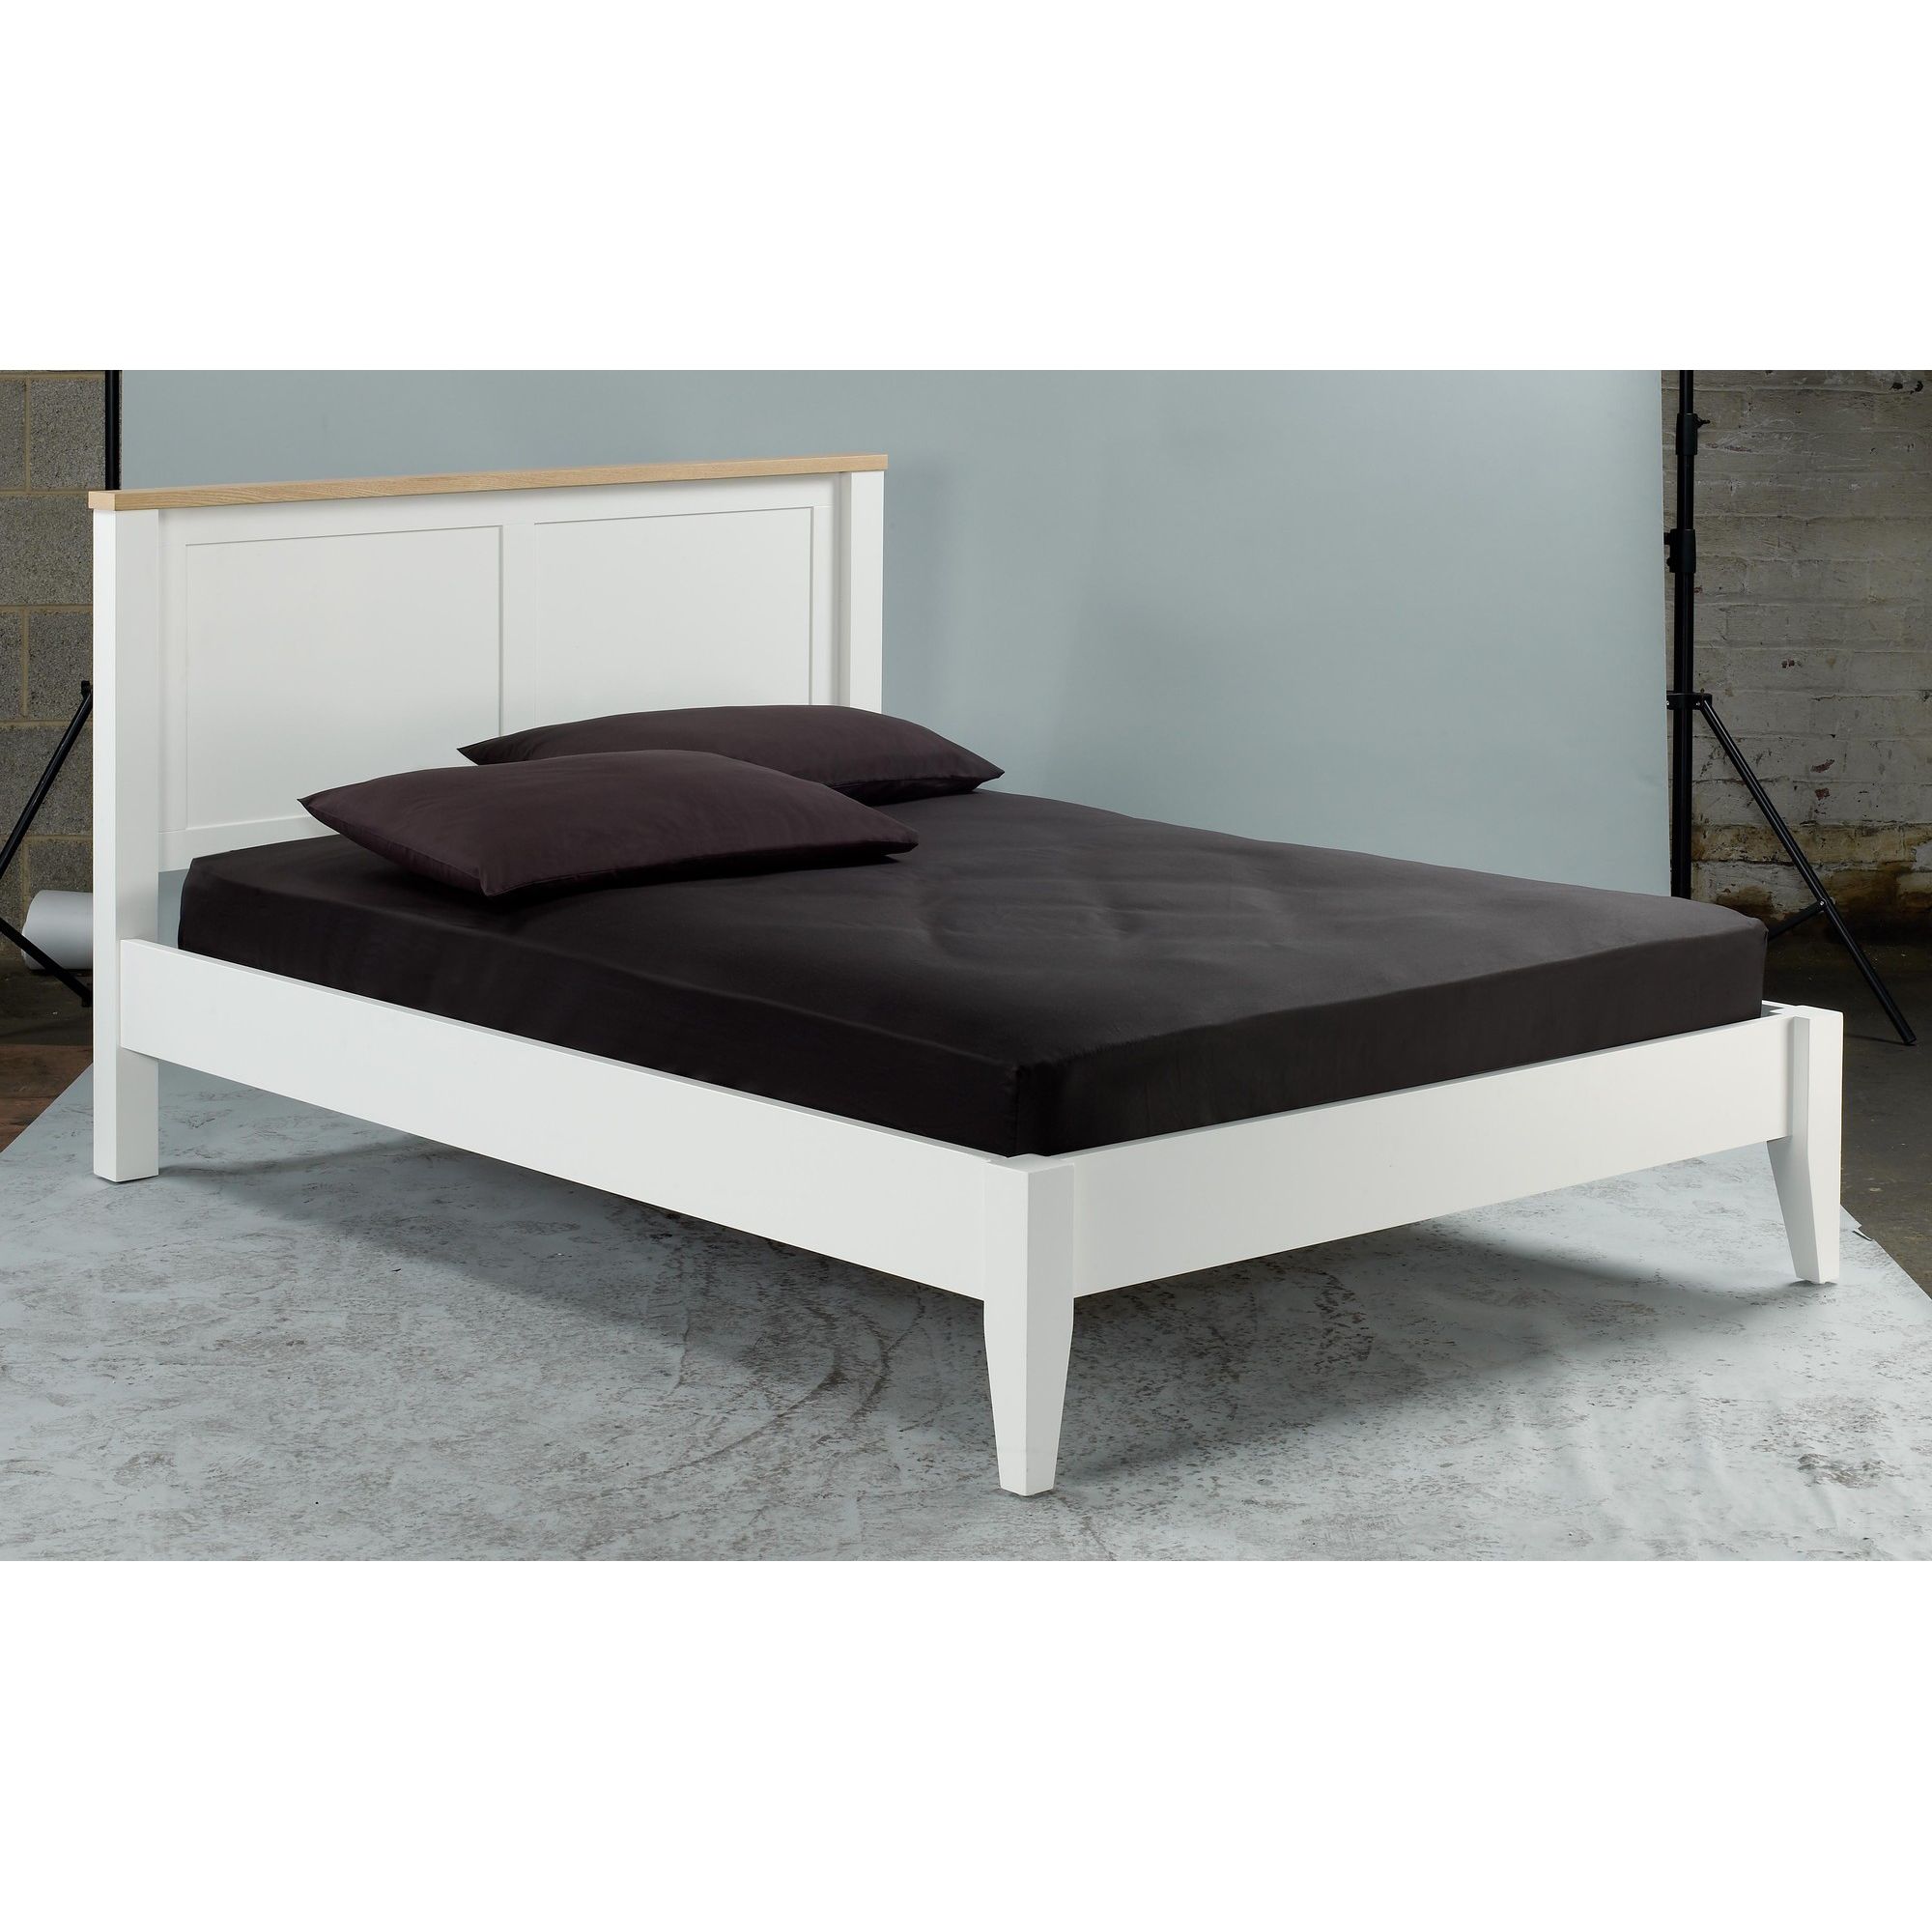 Home Zone Chicago Bed Frame - Double at Tesco Direct